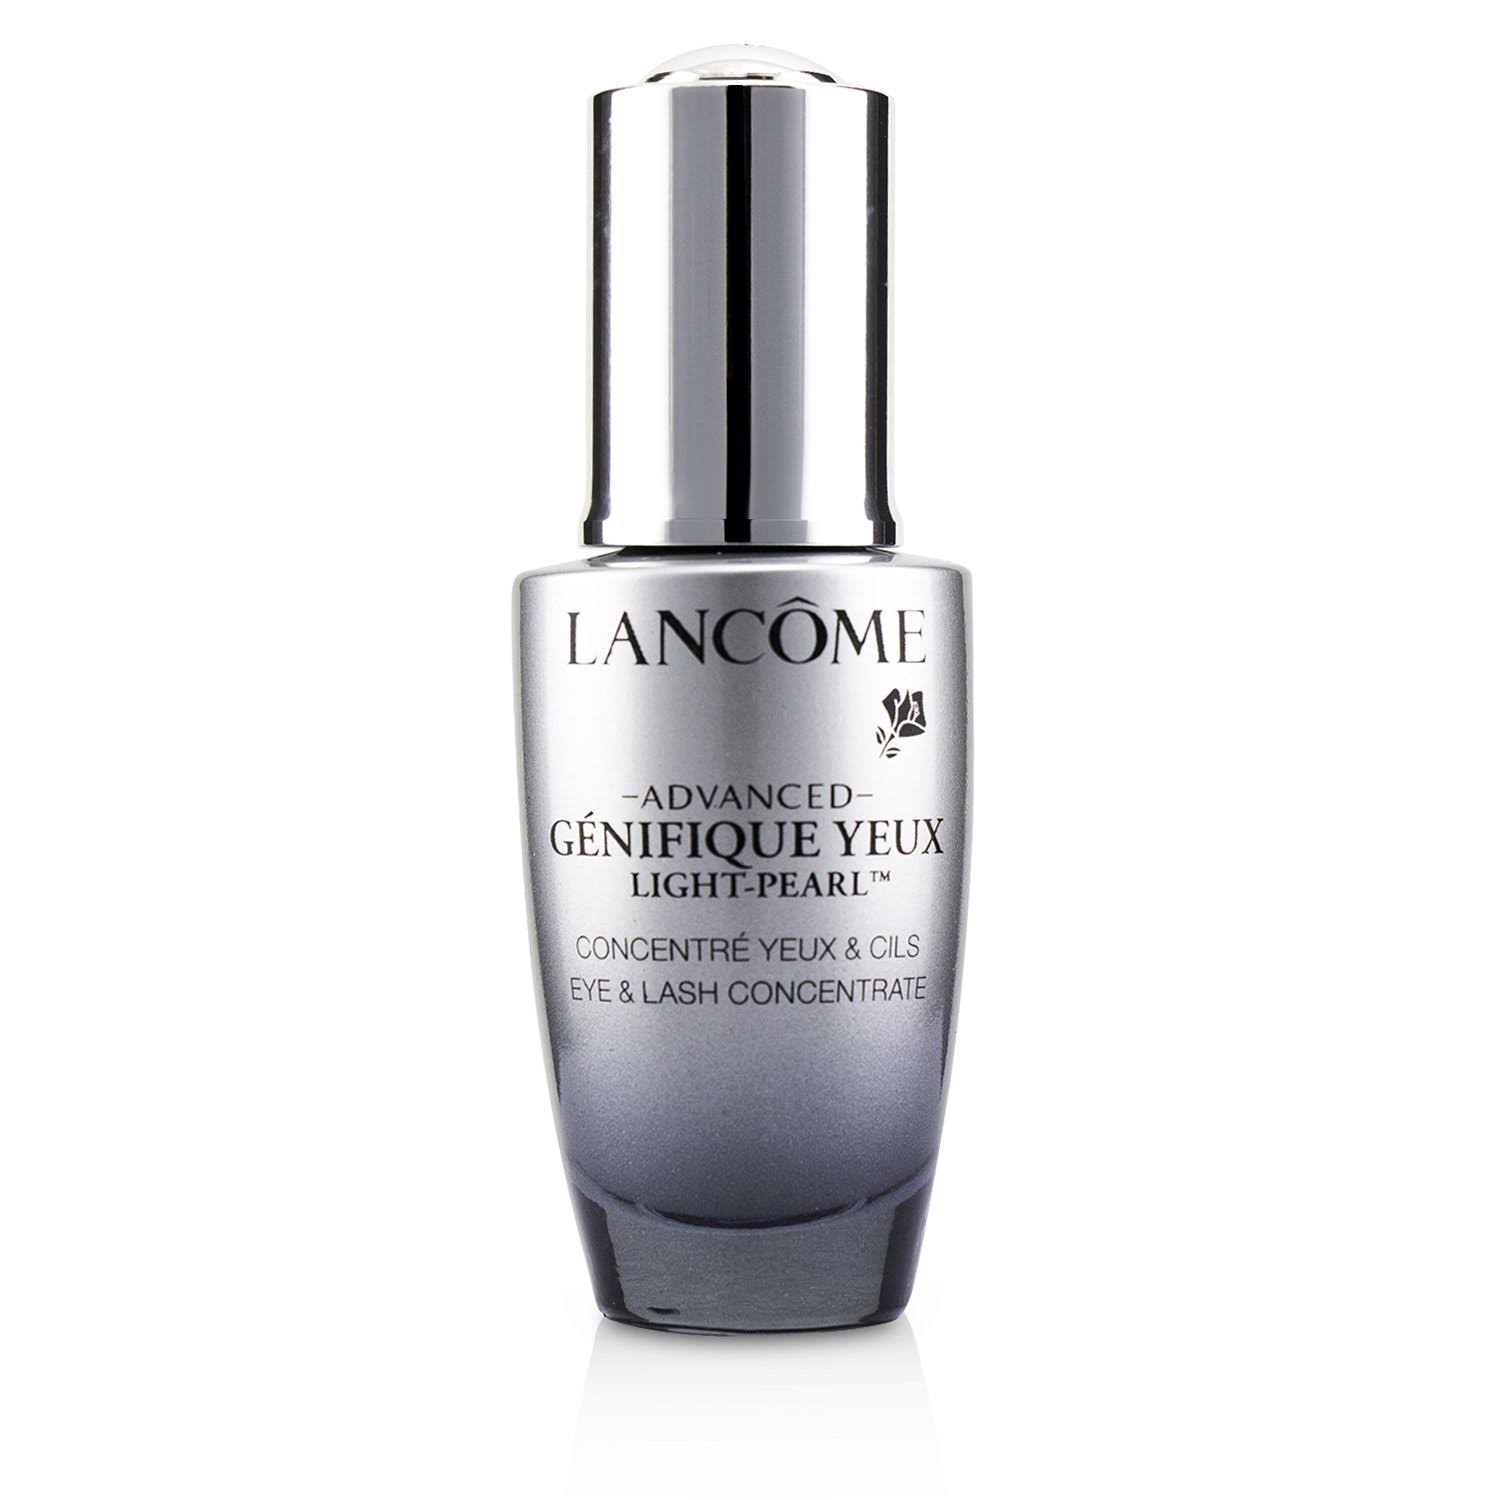 Lancome - Genifique Yeux Advanced Light-Pearl Youth Activating Eye & Lash Concentrate 20ml / 0.67oz